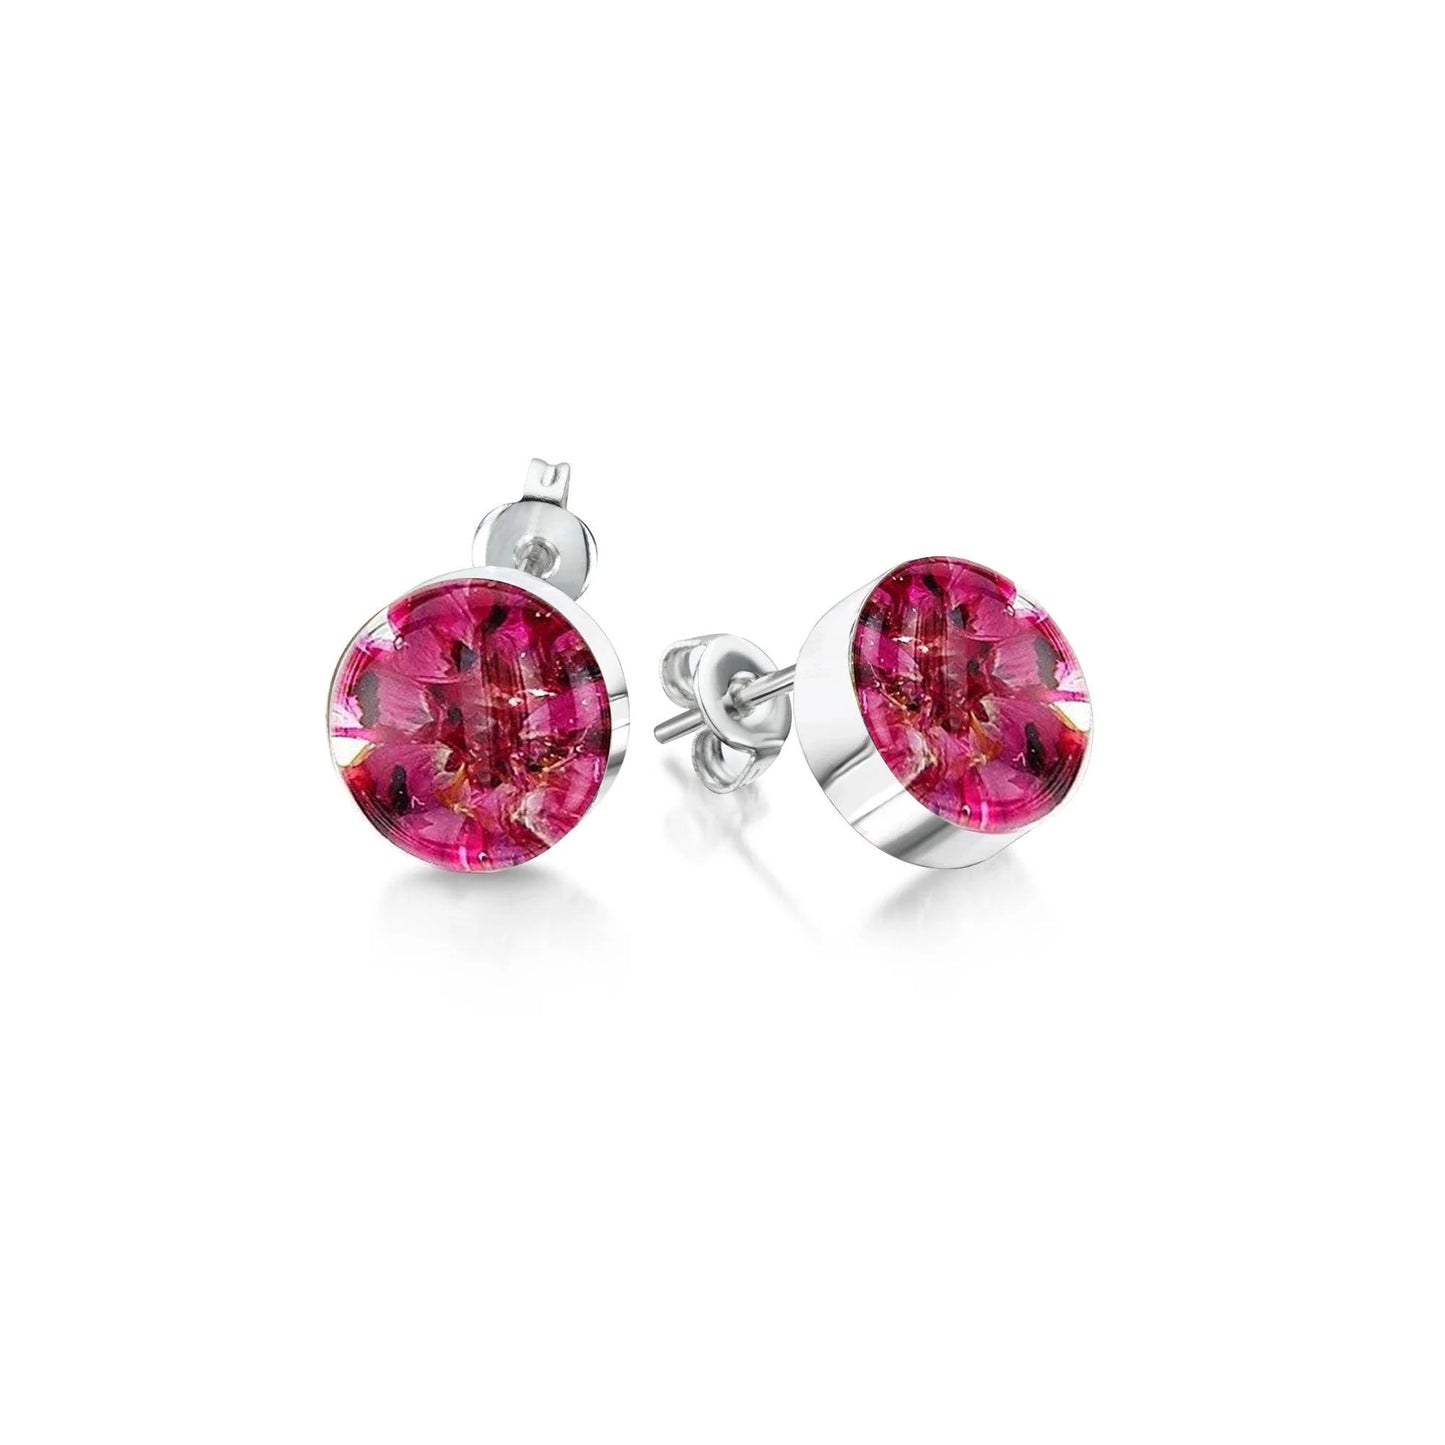 Sterling Silver Round Stud Earrings with real heather flowers